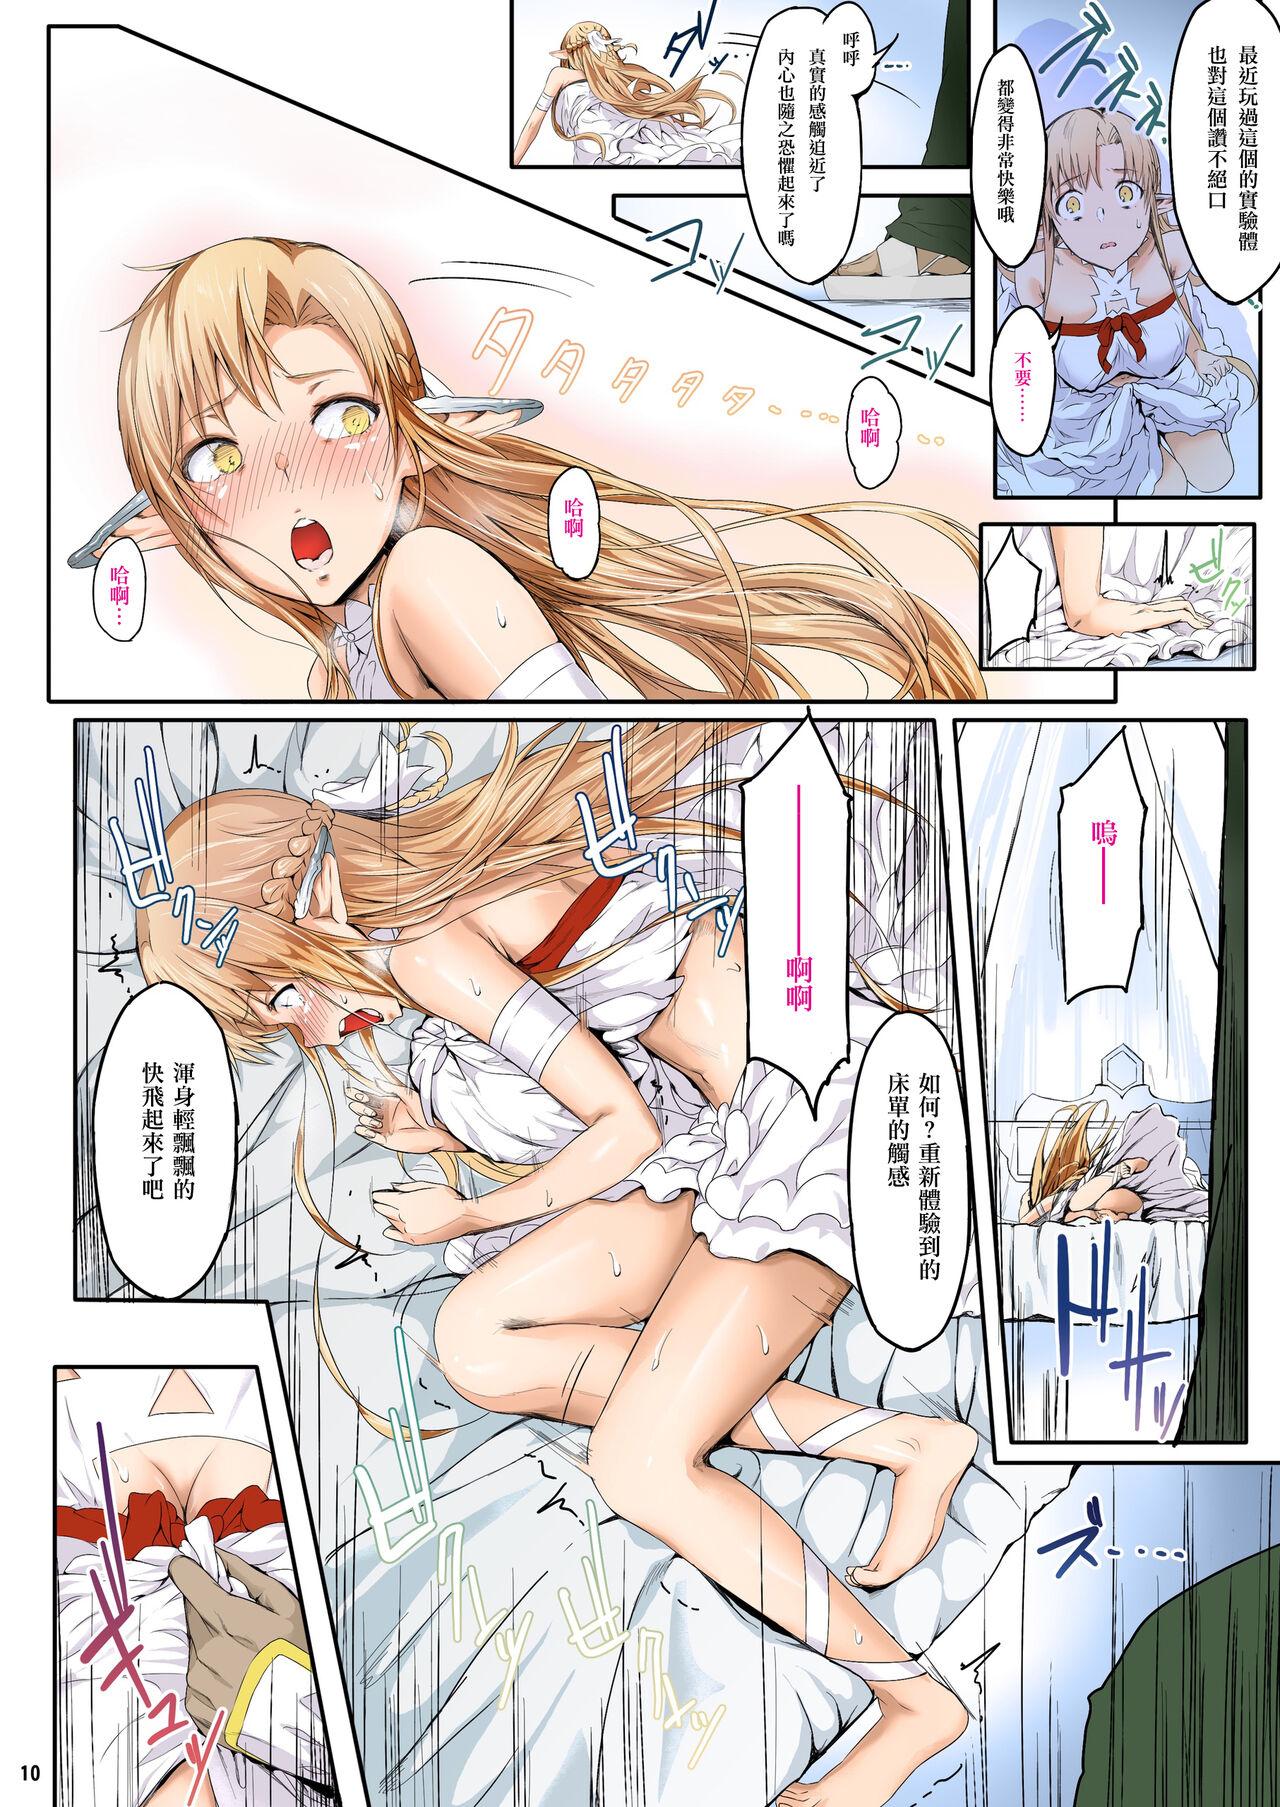 Pussyeating Asunama - Sword art online Car - Page 10